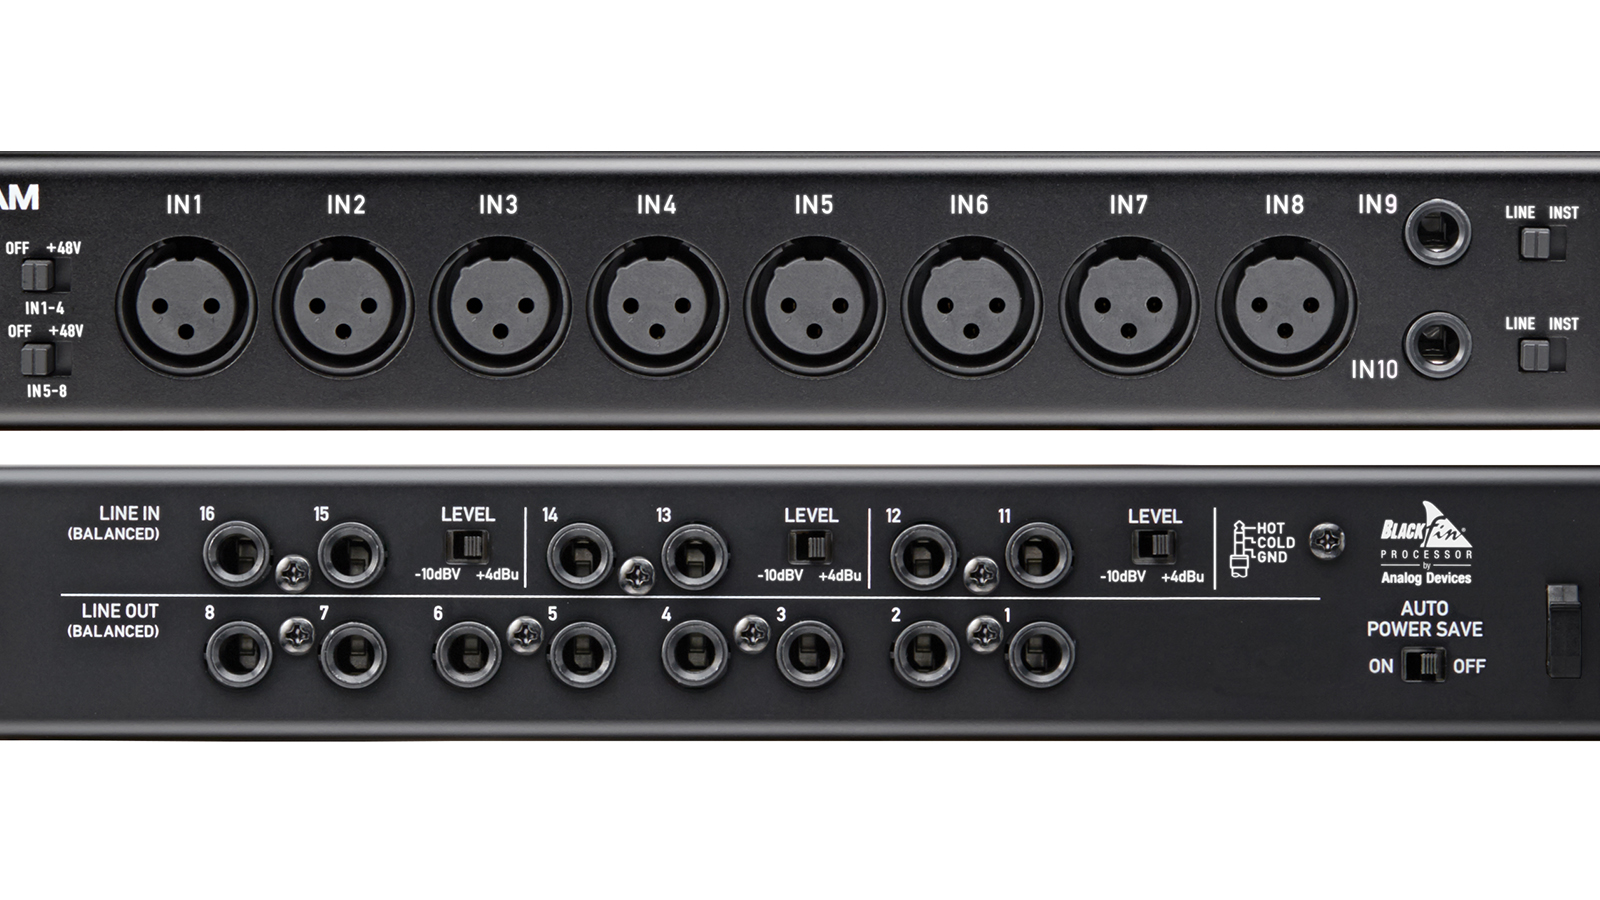 Eight XLR mic inputs and 8 TRS line inputs